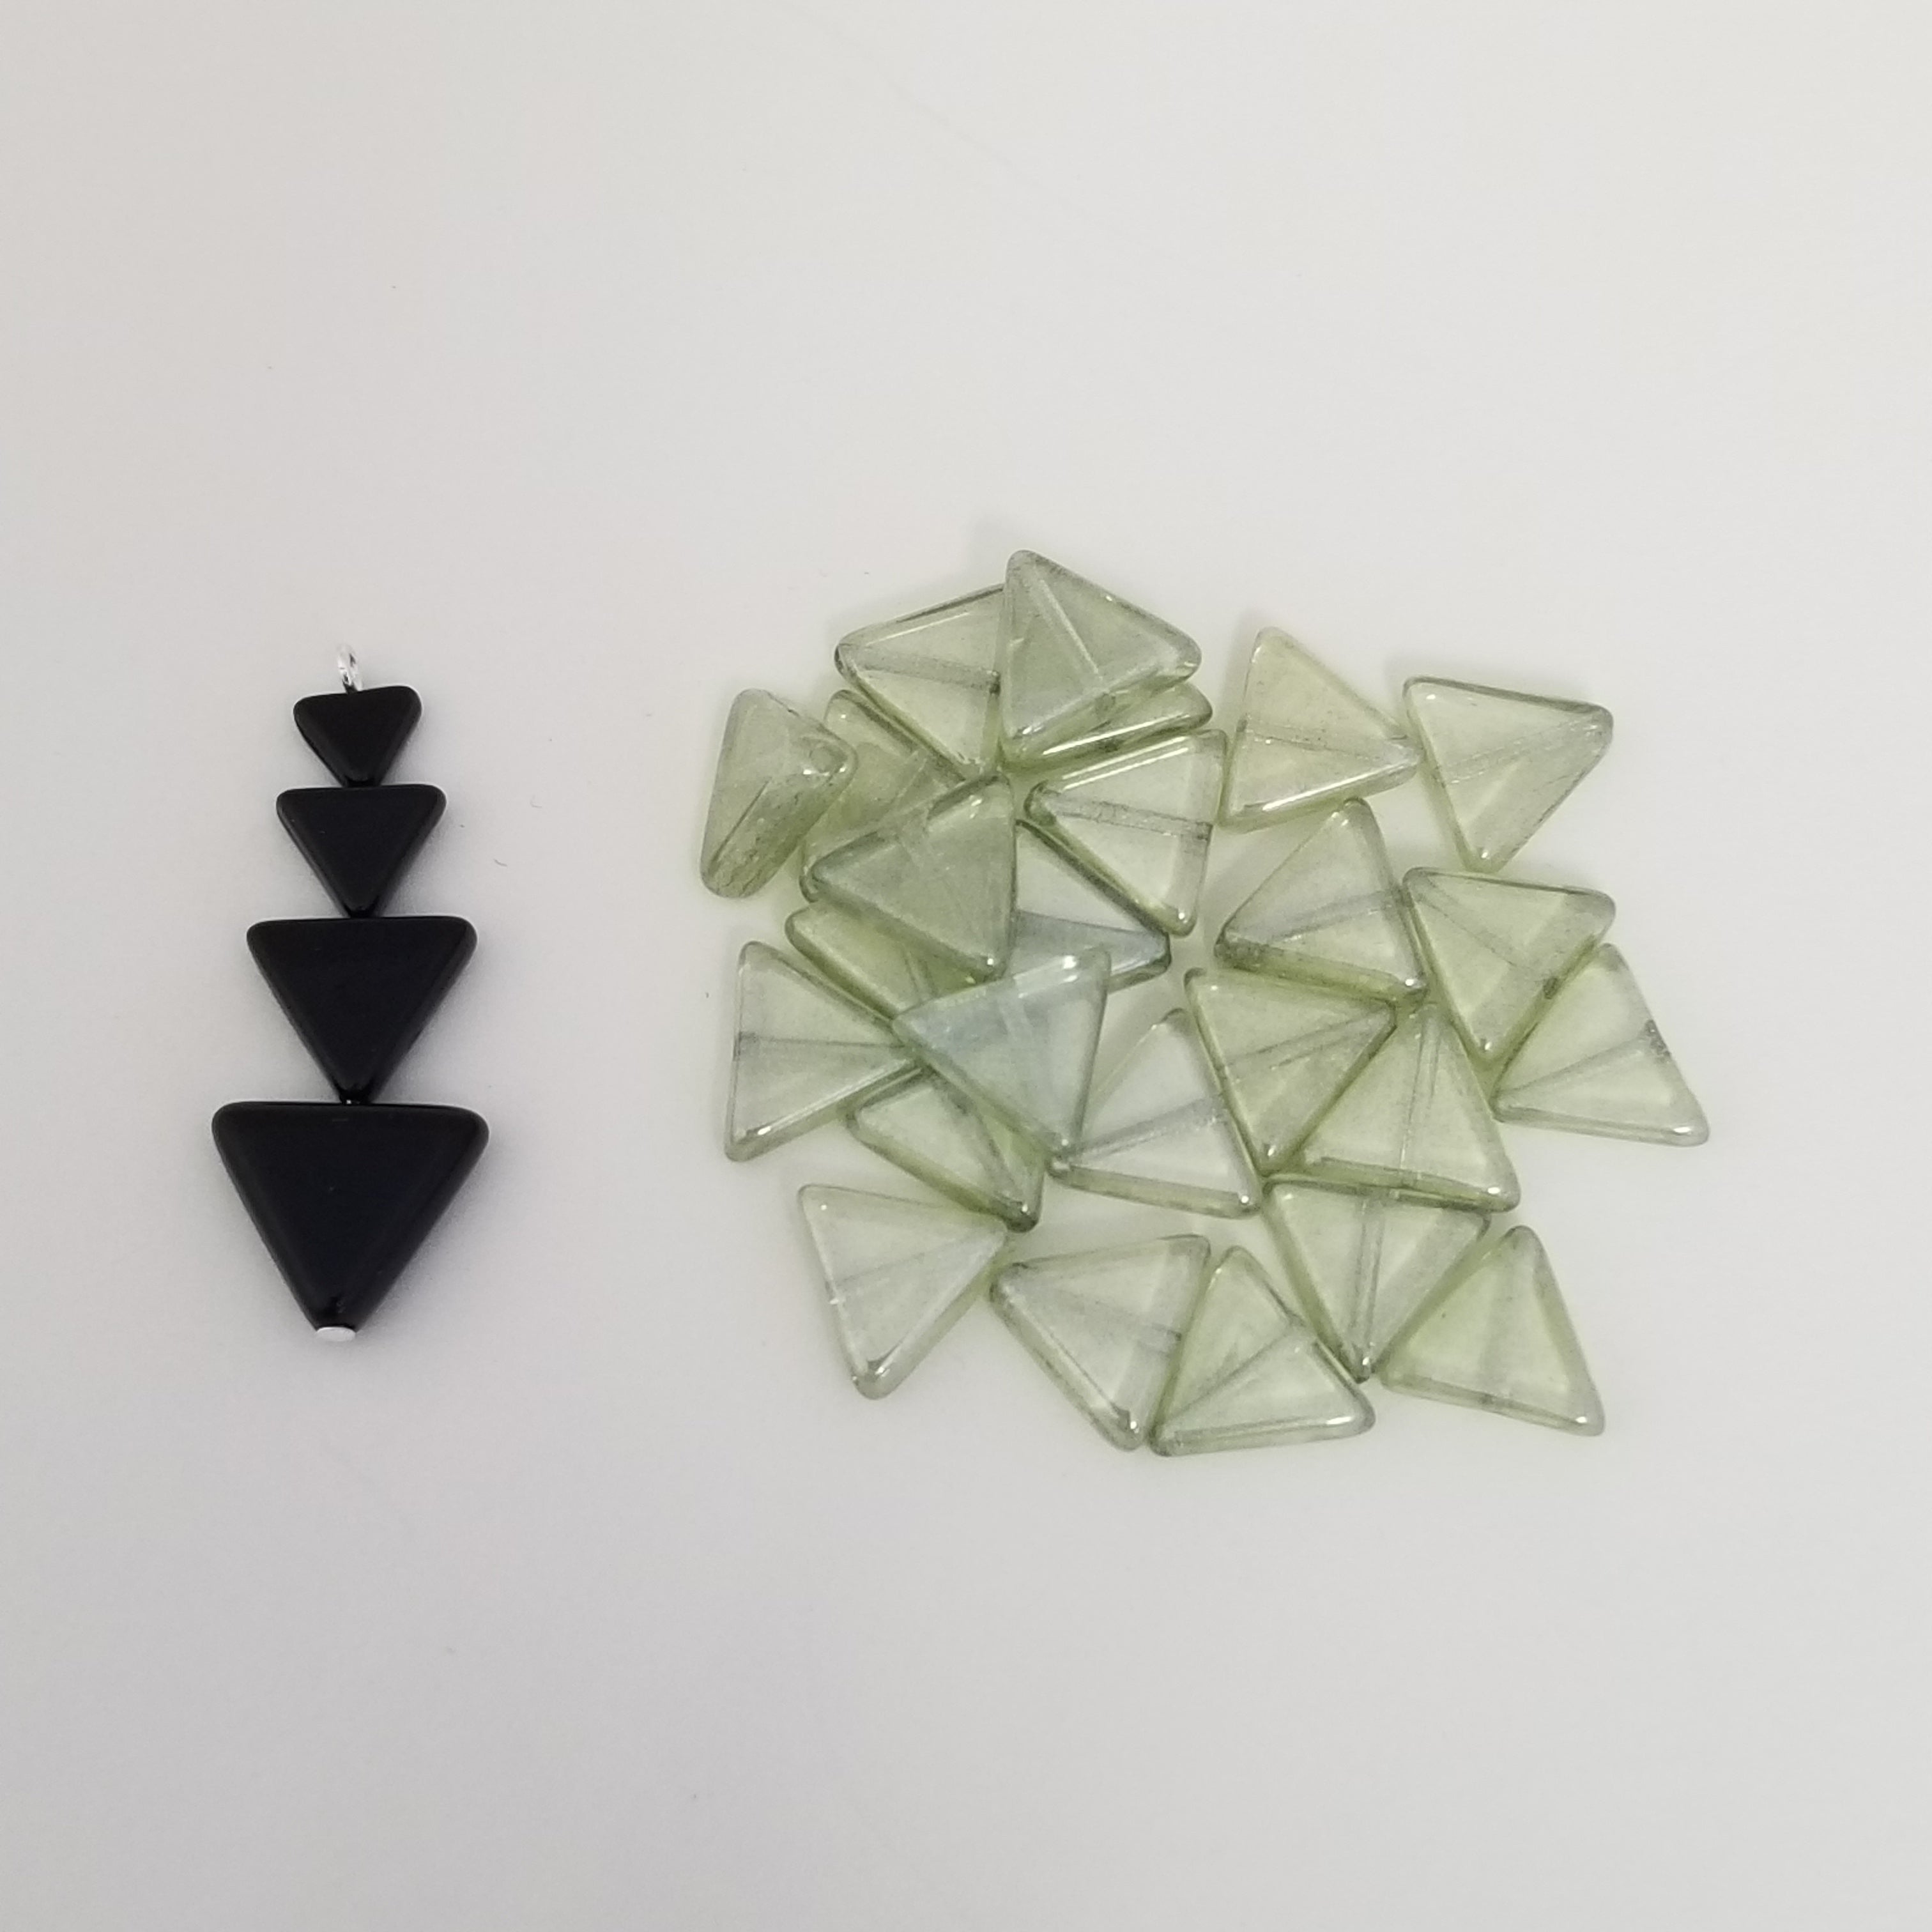 Green Luster 10x10mm glass triangles